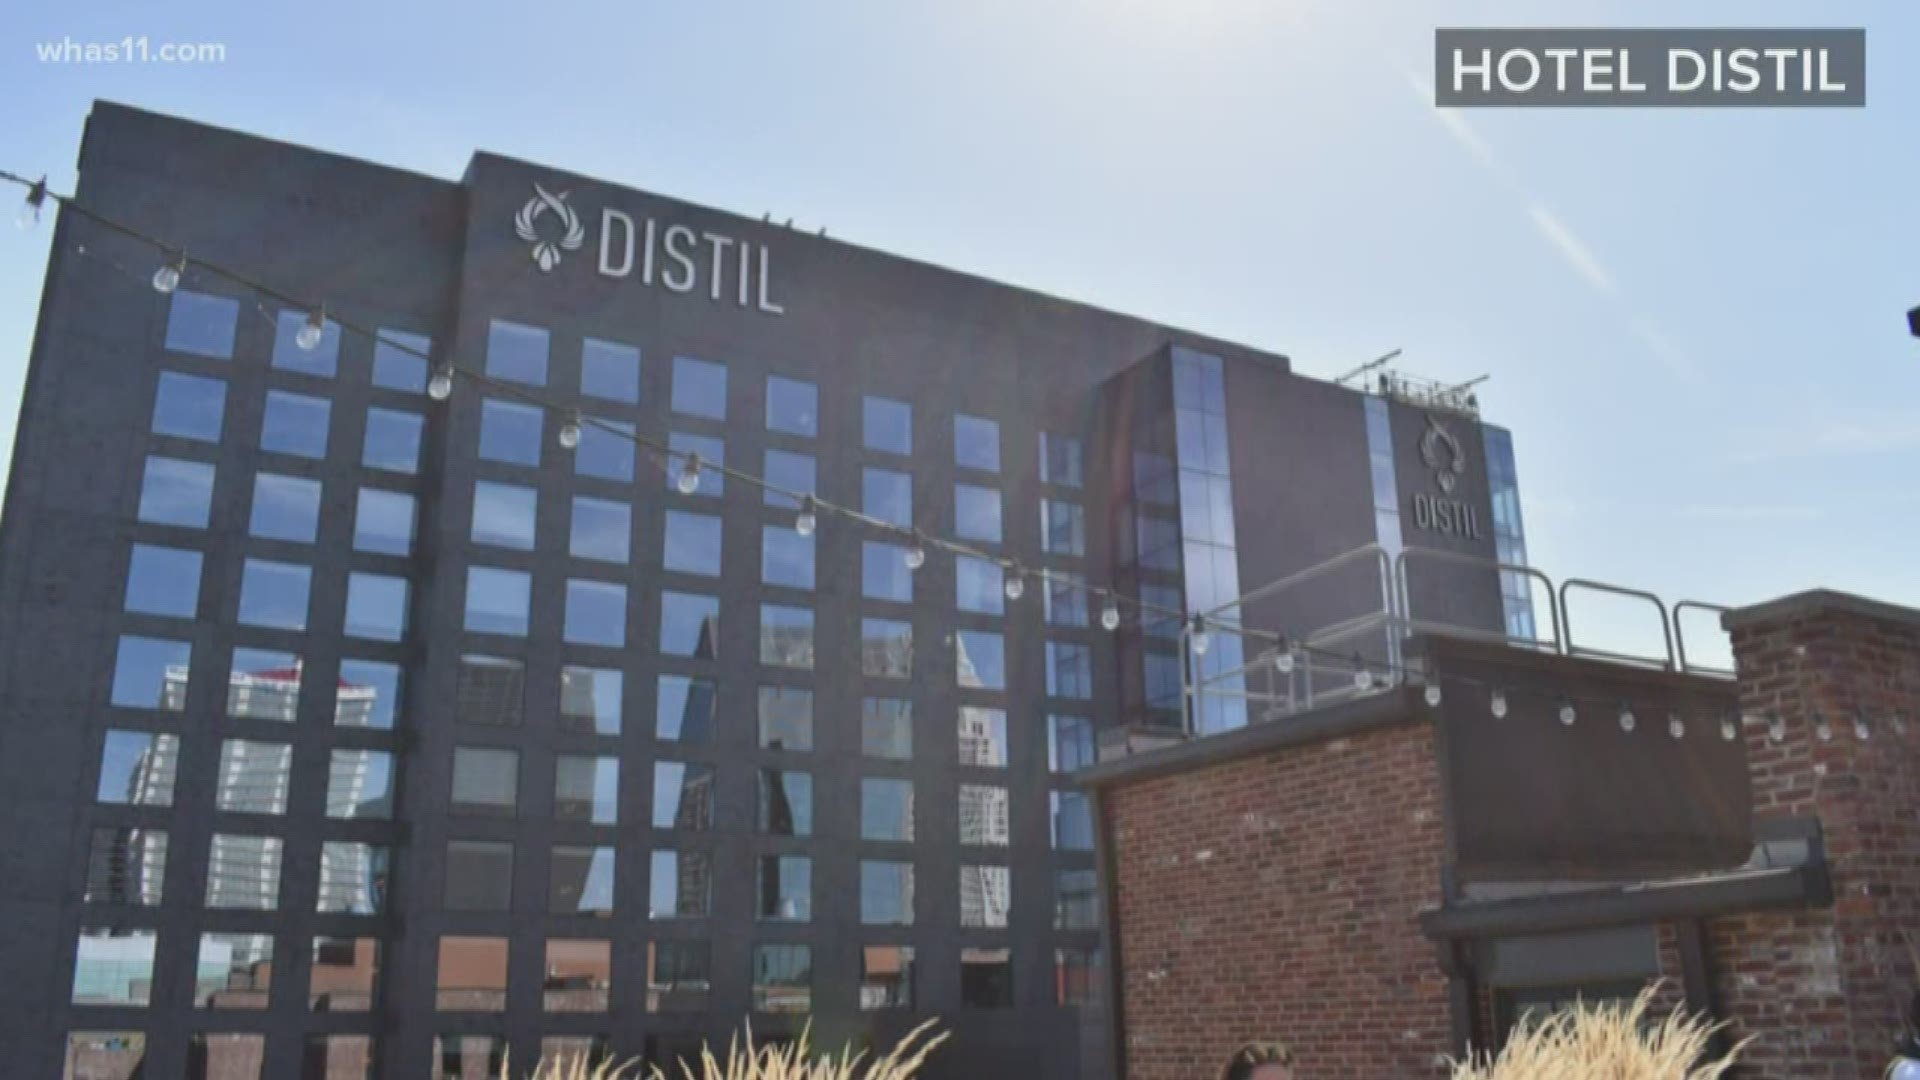 Hotel Distil is located on the historic Whiskey Row is one of 20 new hotels that were nominated.